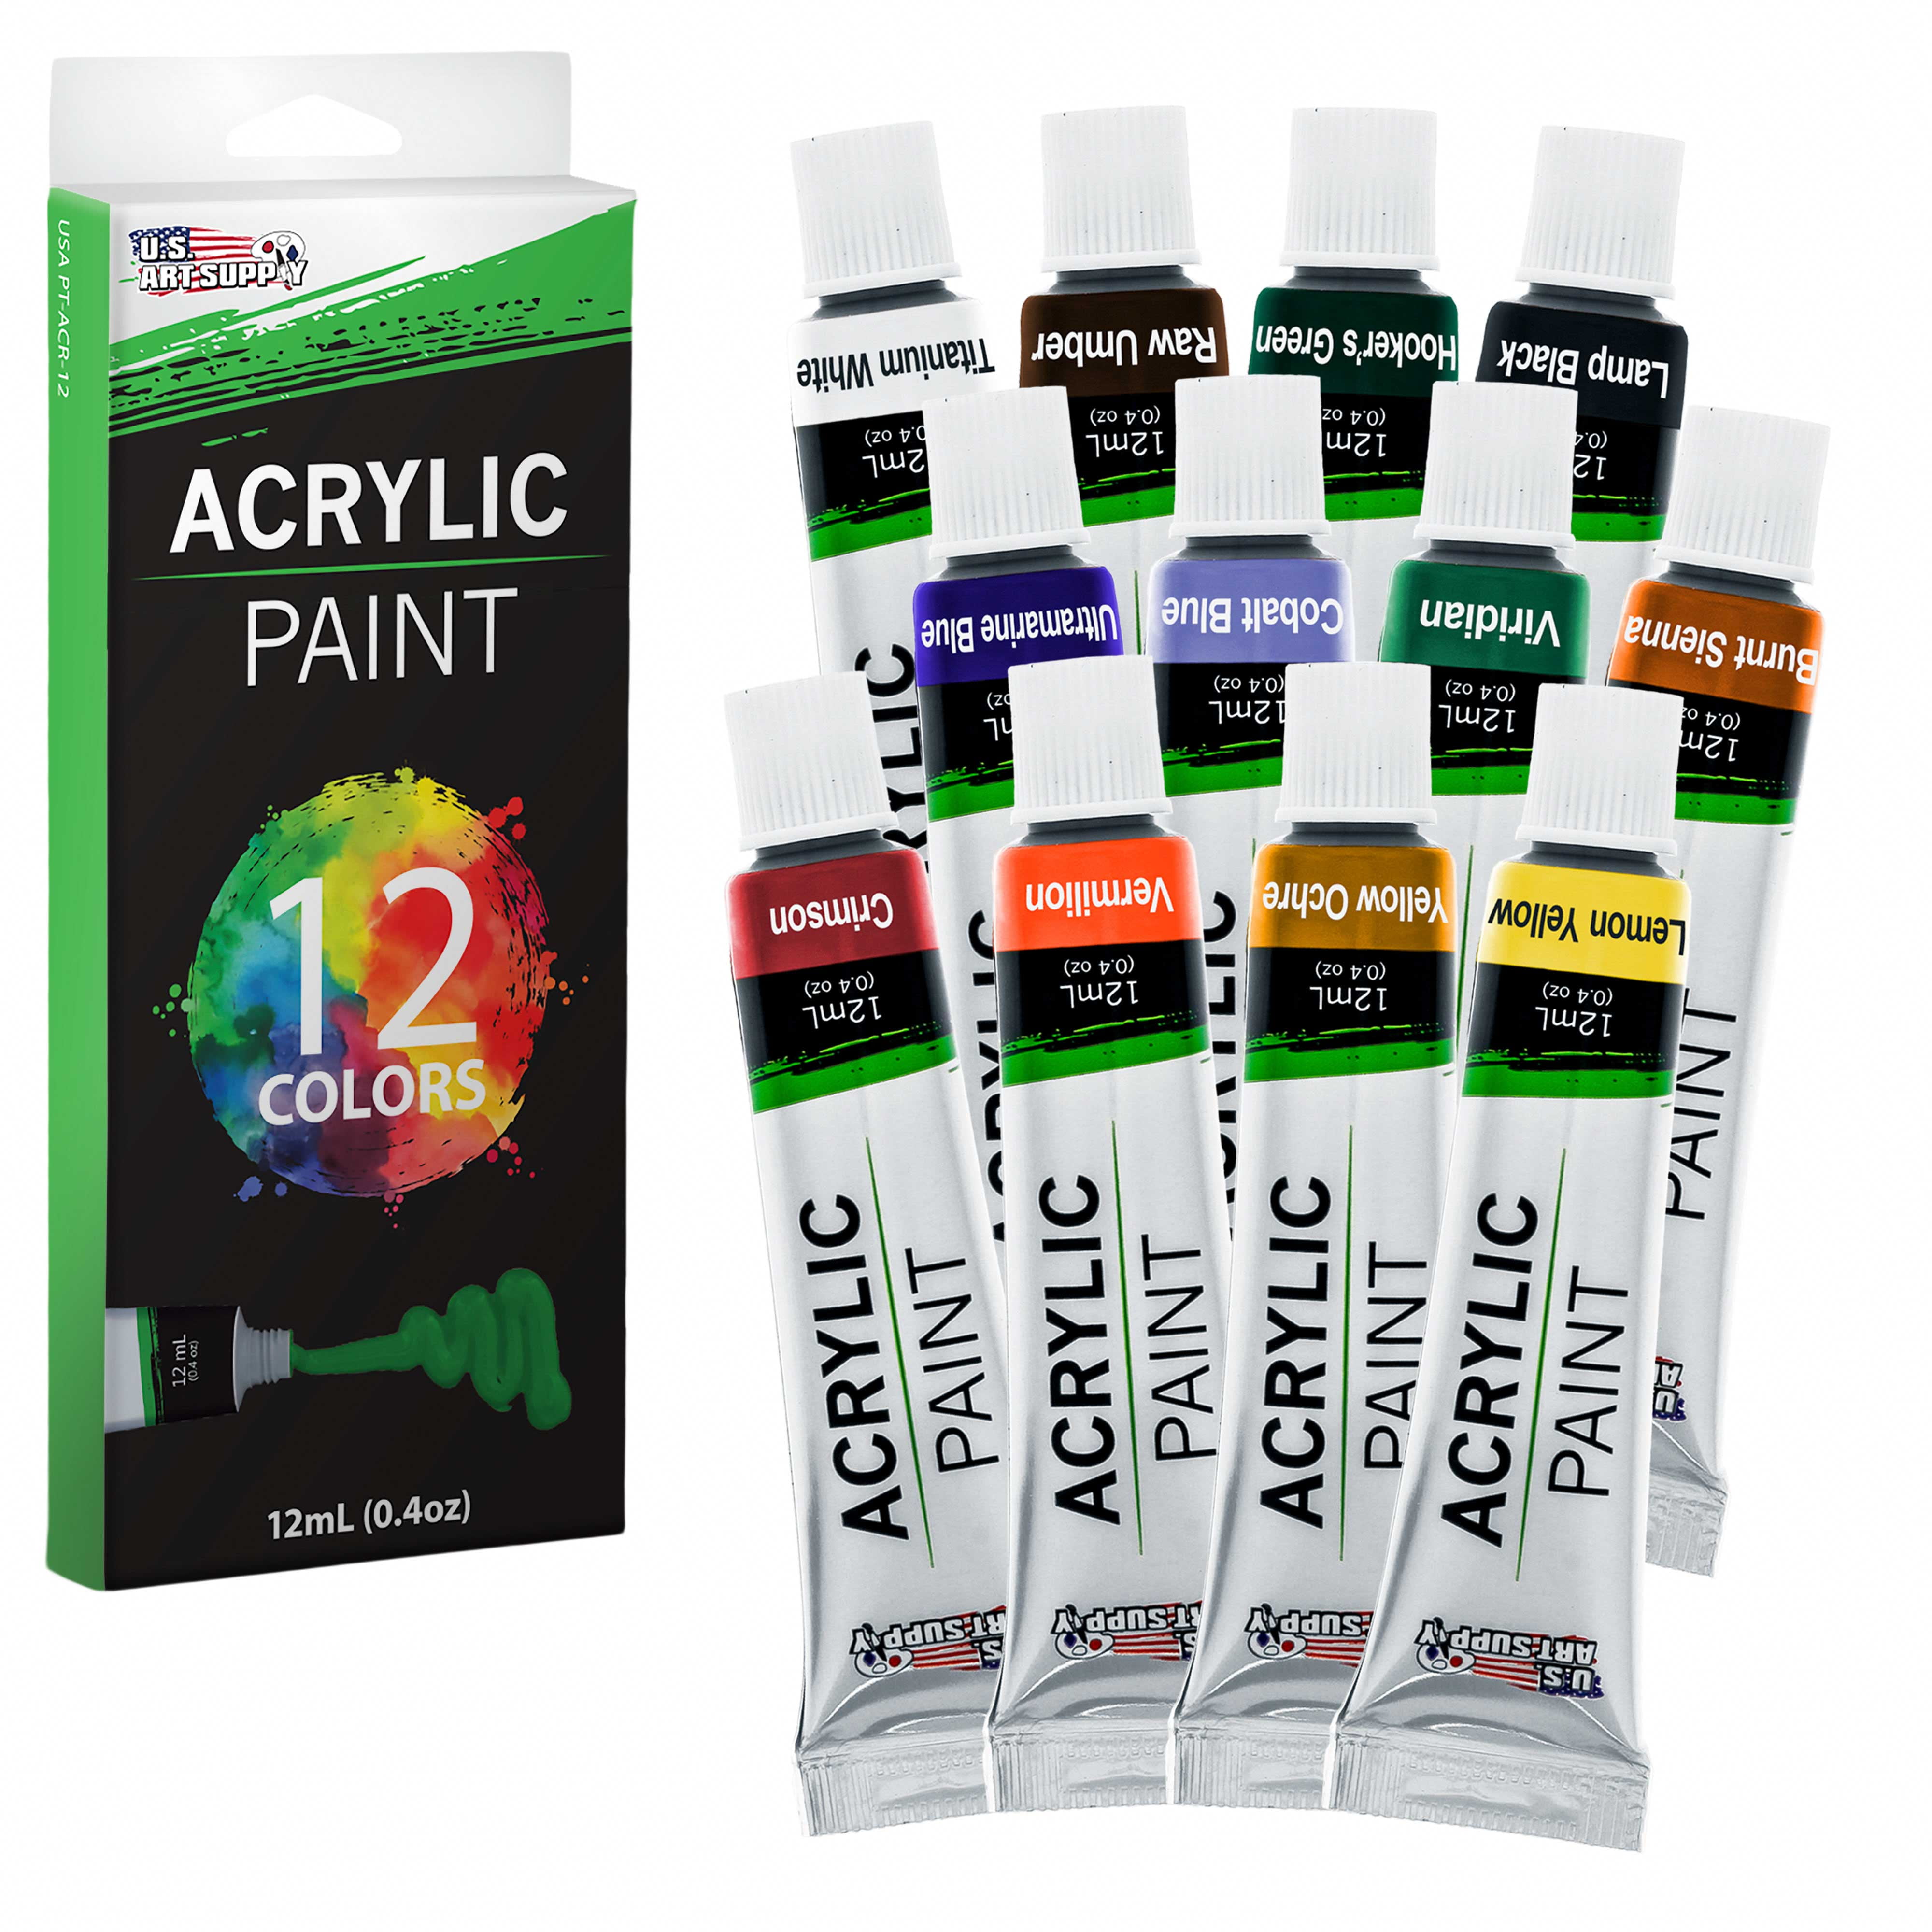  Deluxe Acrylic Paint Set for Kids Age 8-12 - Includes Easel, 35  Art Supplies, Brushes, Canvas, Painting Pad : Arts, Crafts & Sewing